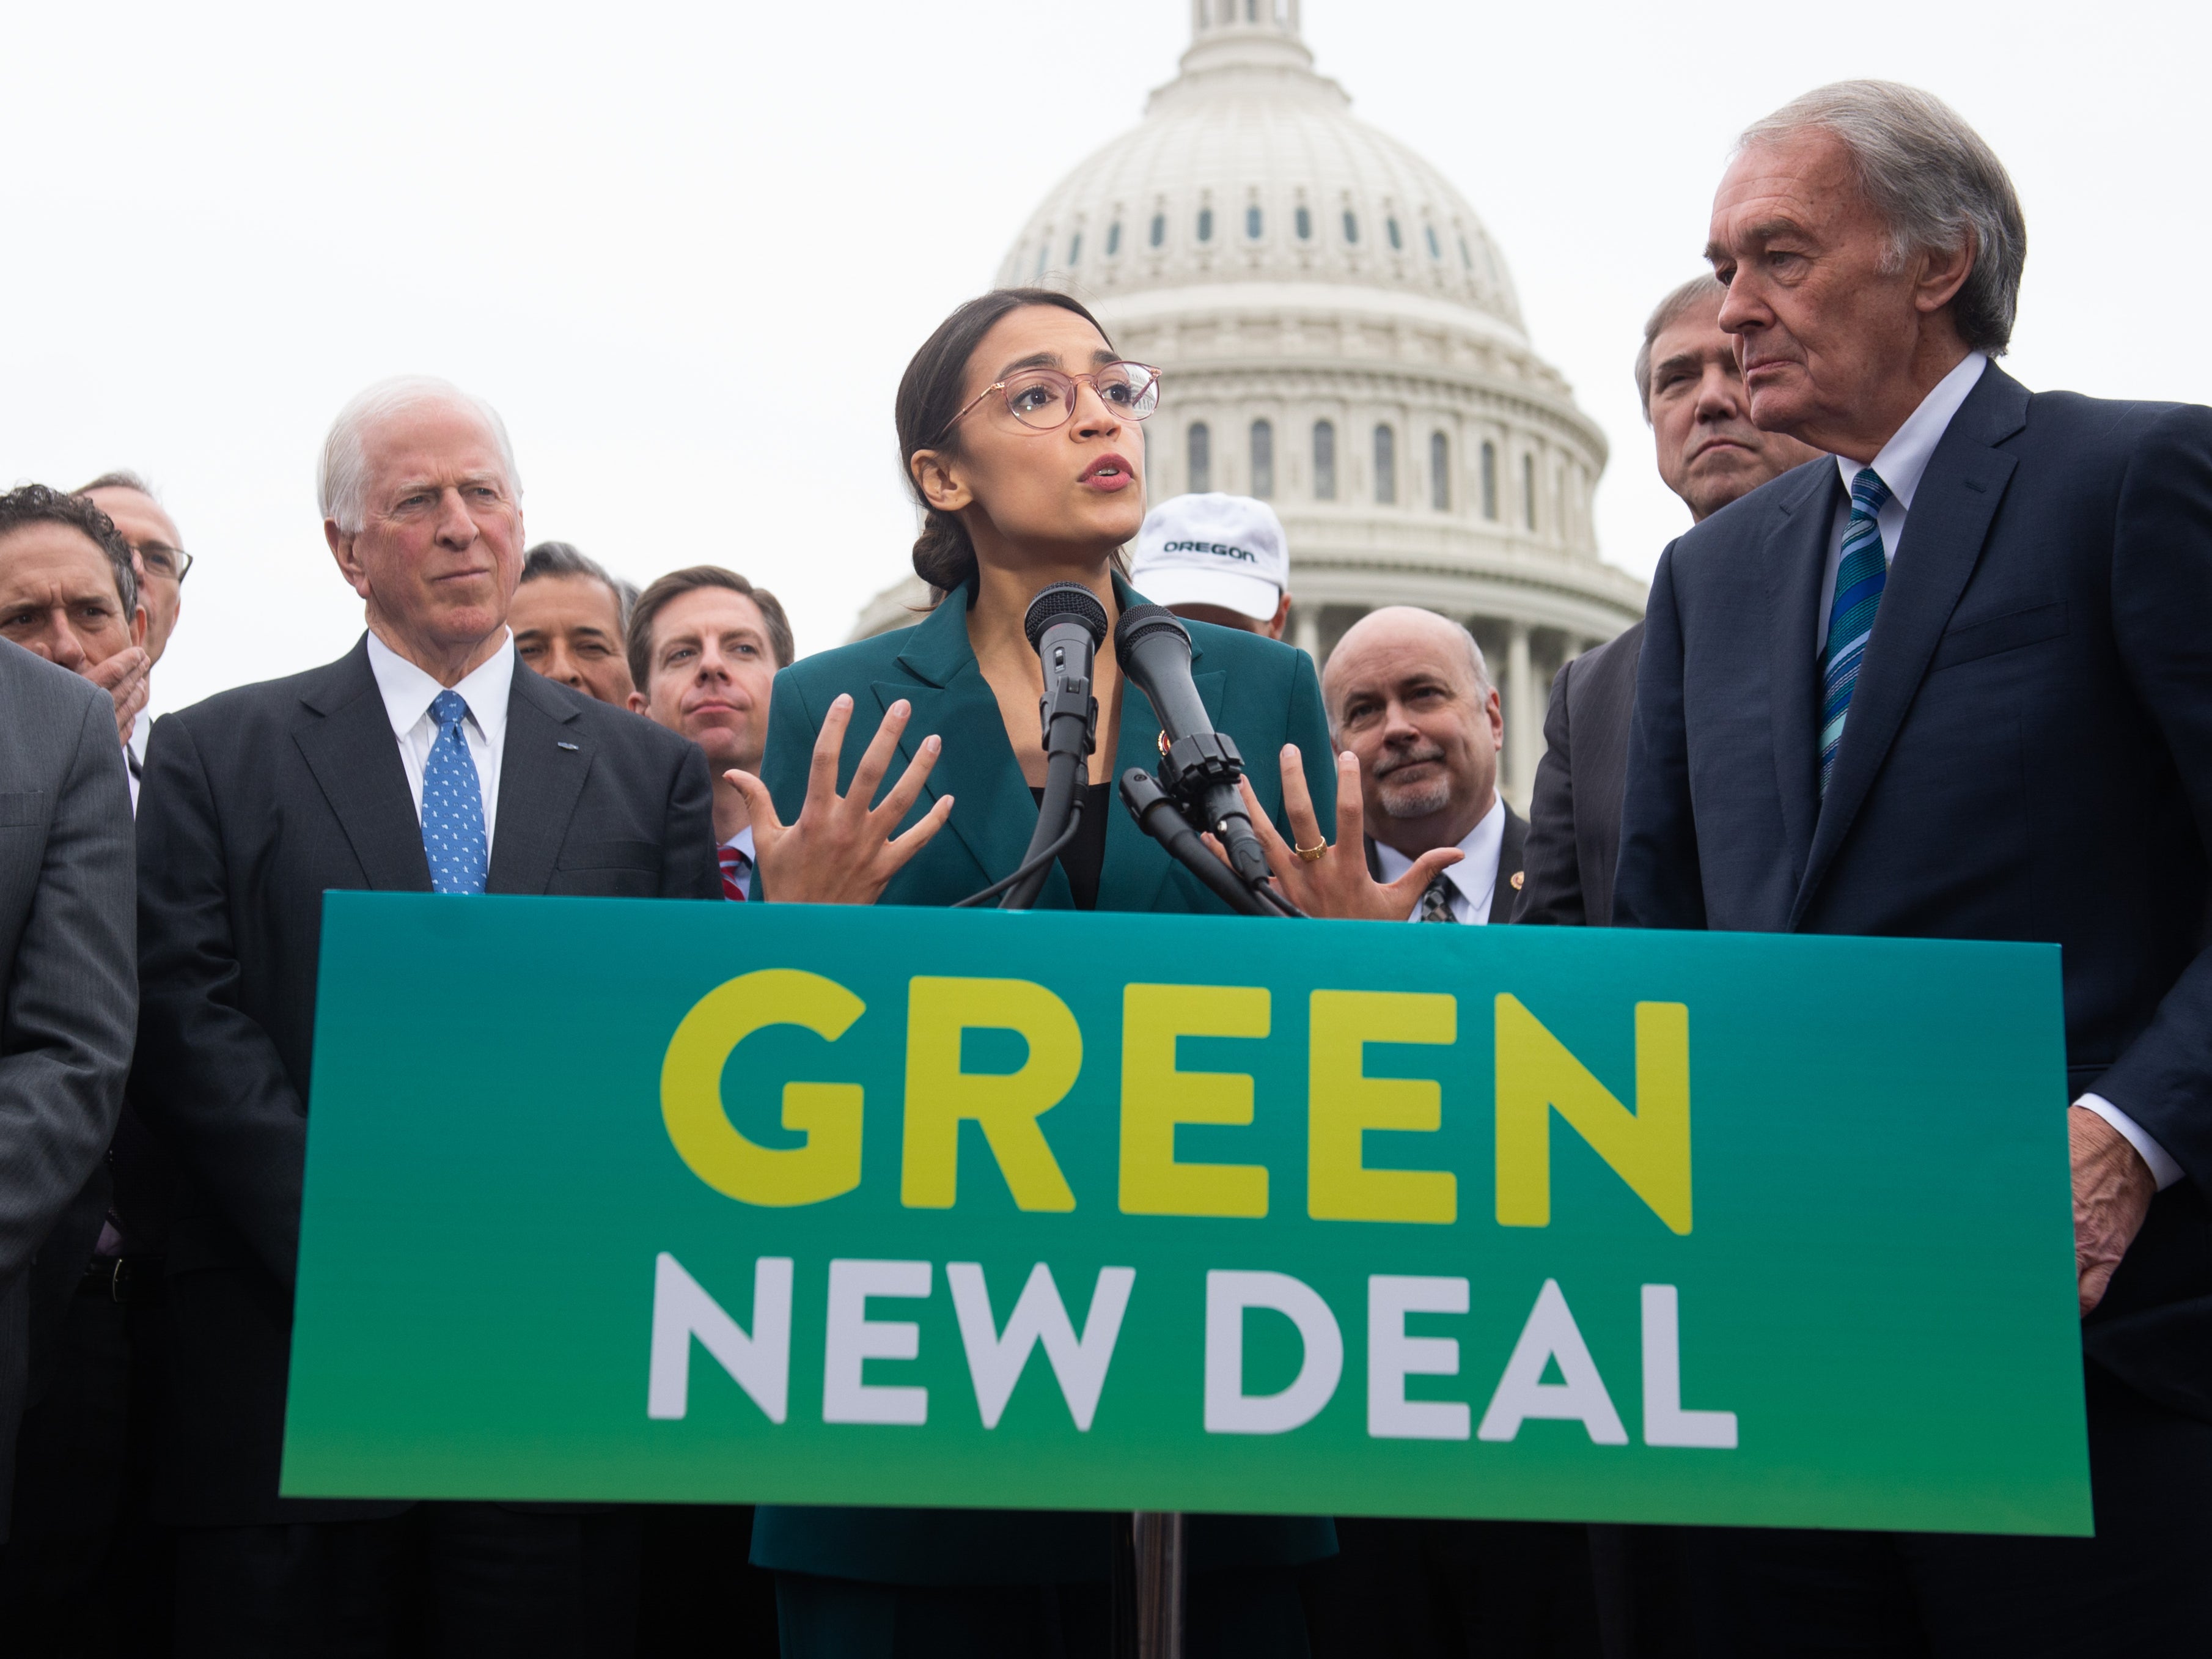 File: Alexandria Ocasio-Cortez and Ed Markey introduce the Green New Deal resolution on 7 February 2019